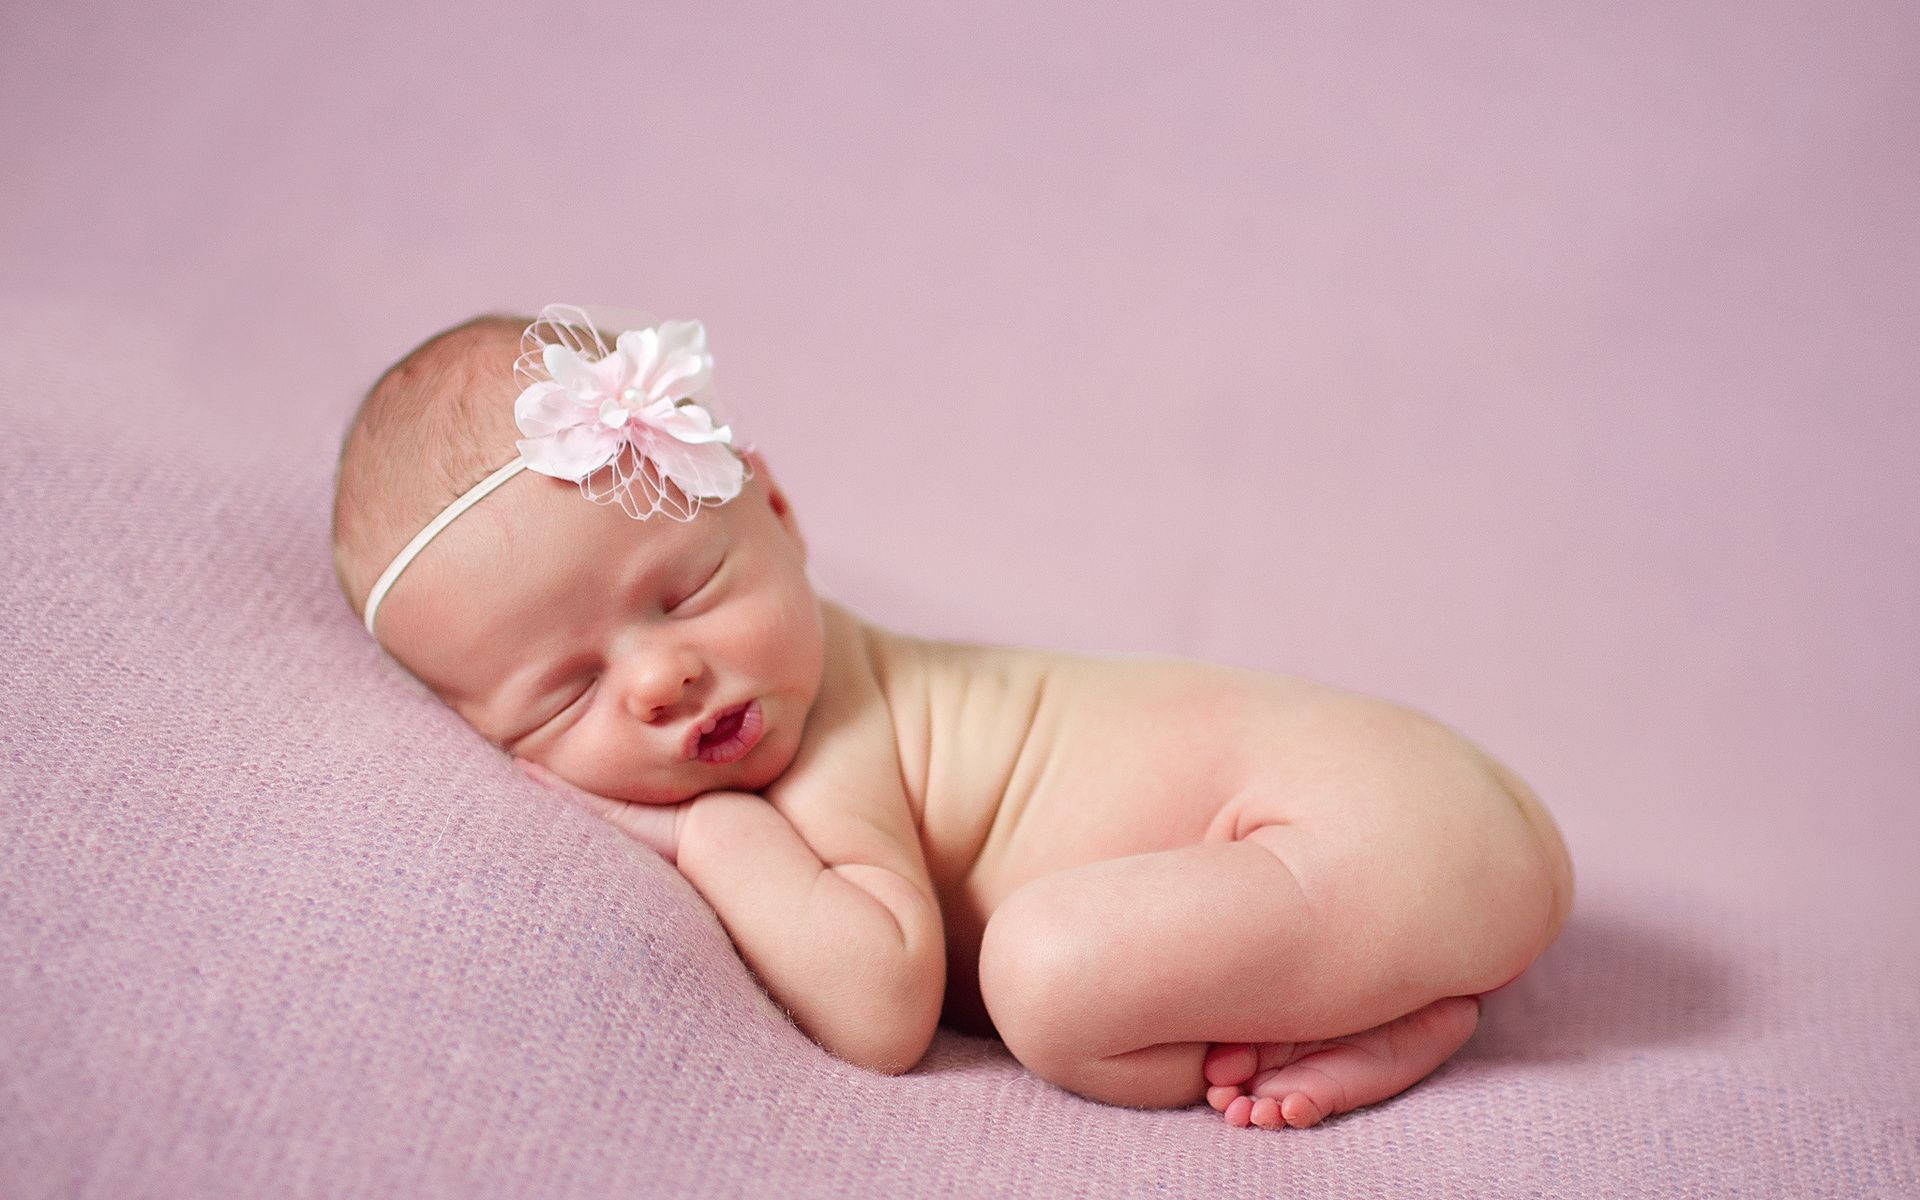 Baby taking a peaceful nap in a flower headband Wallpaper